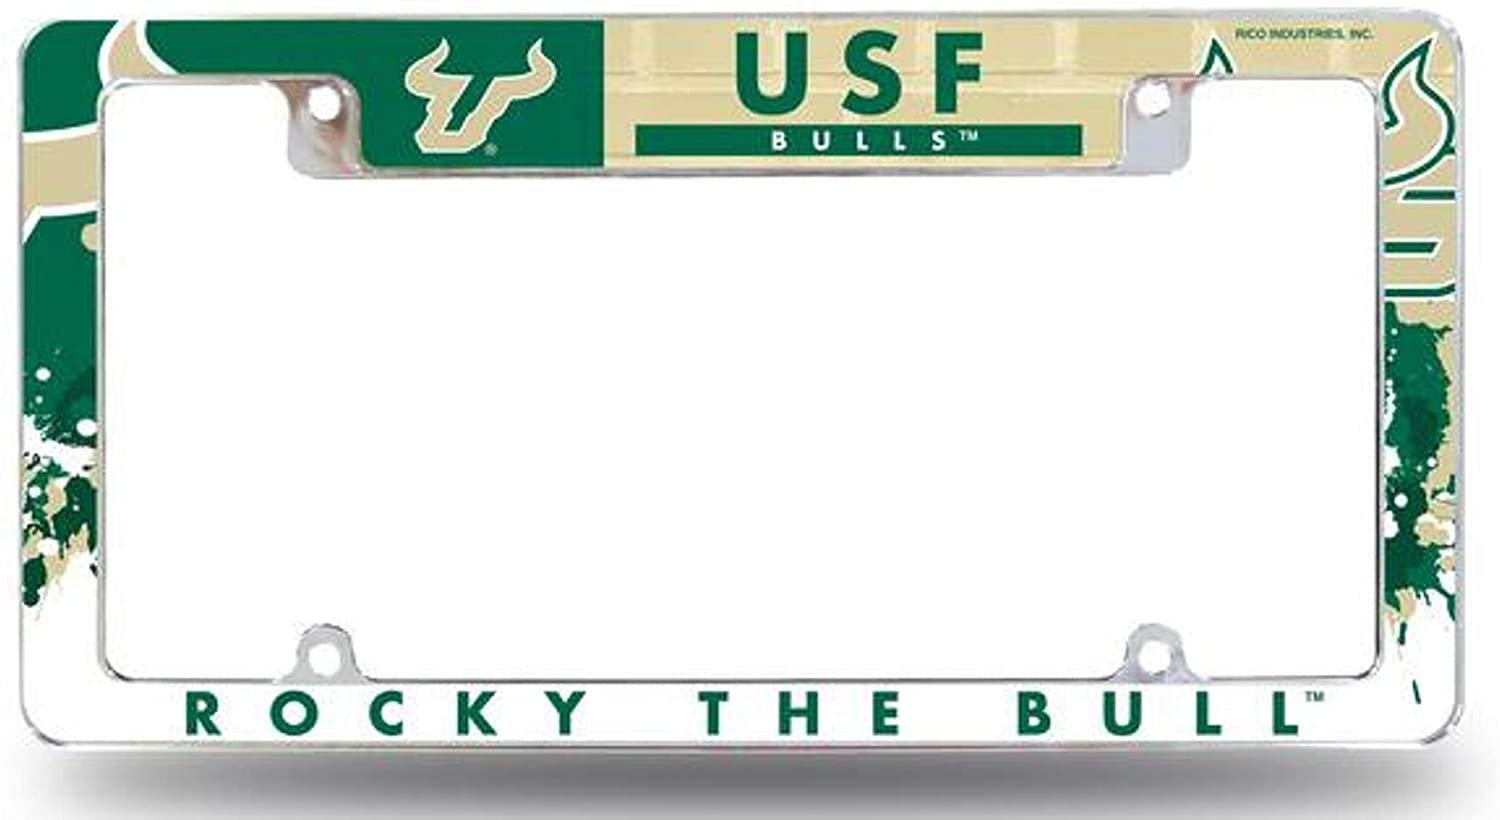 University of South Florida USF Bulls Metal License Plate Frame Tag Cover, All Over Design, 12x6 Inch